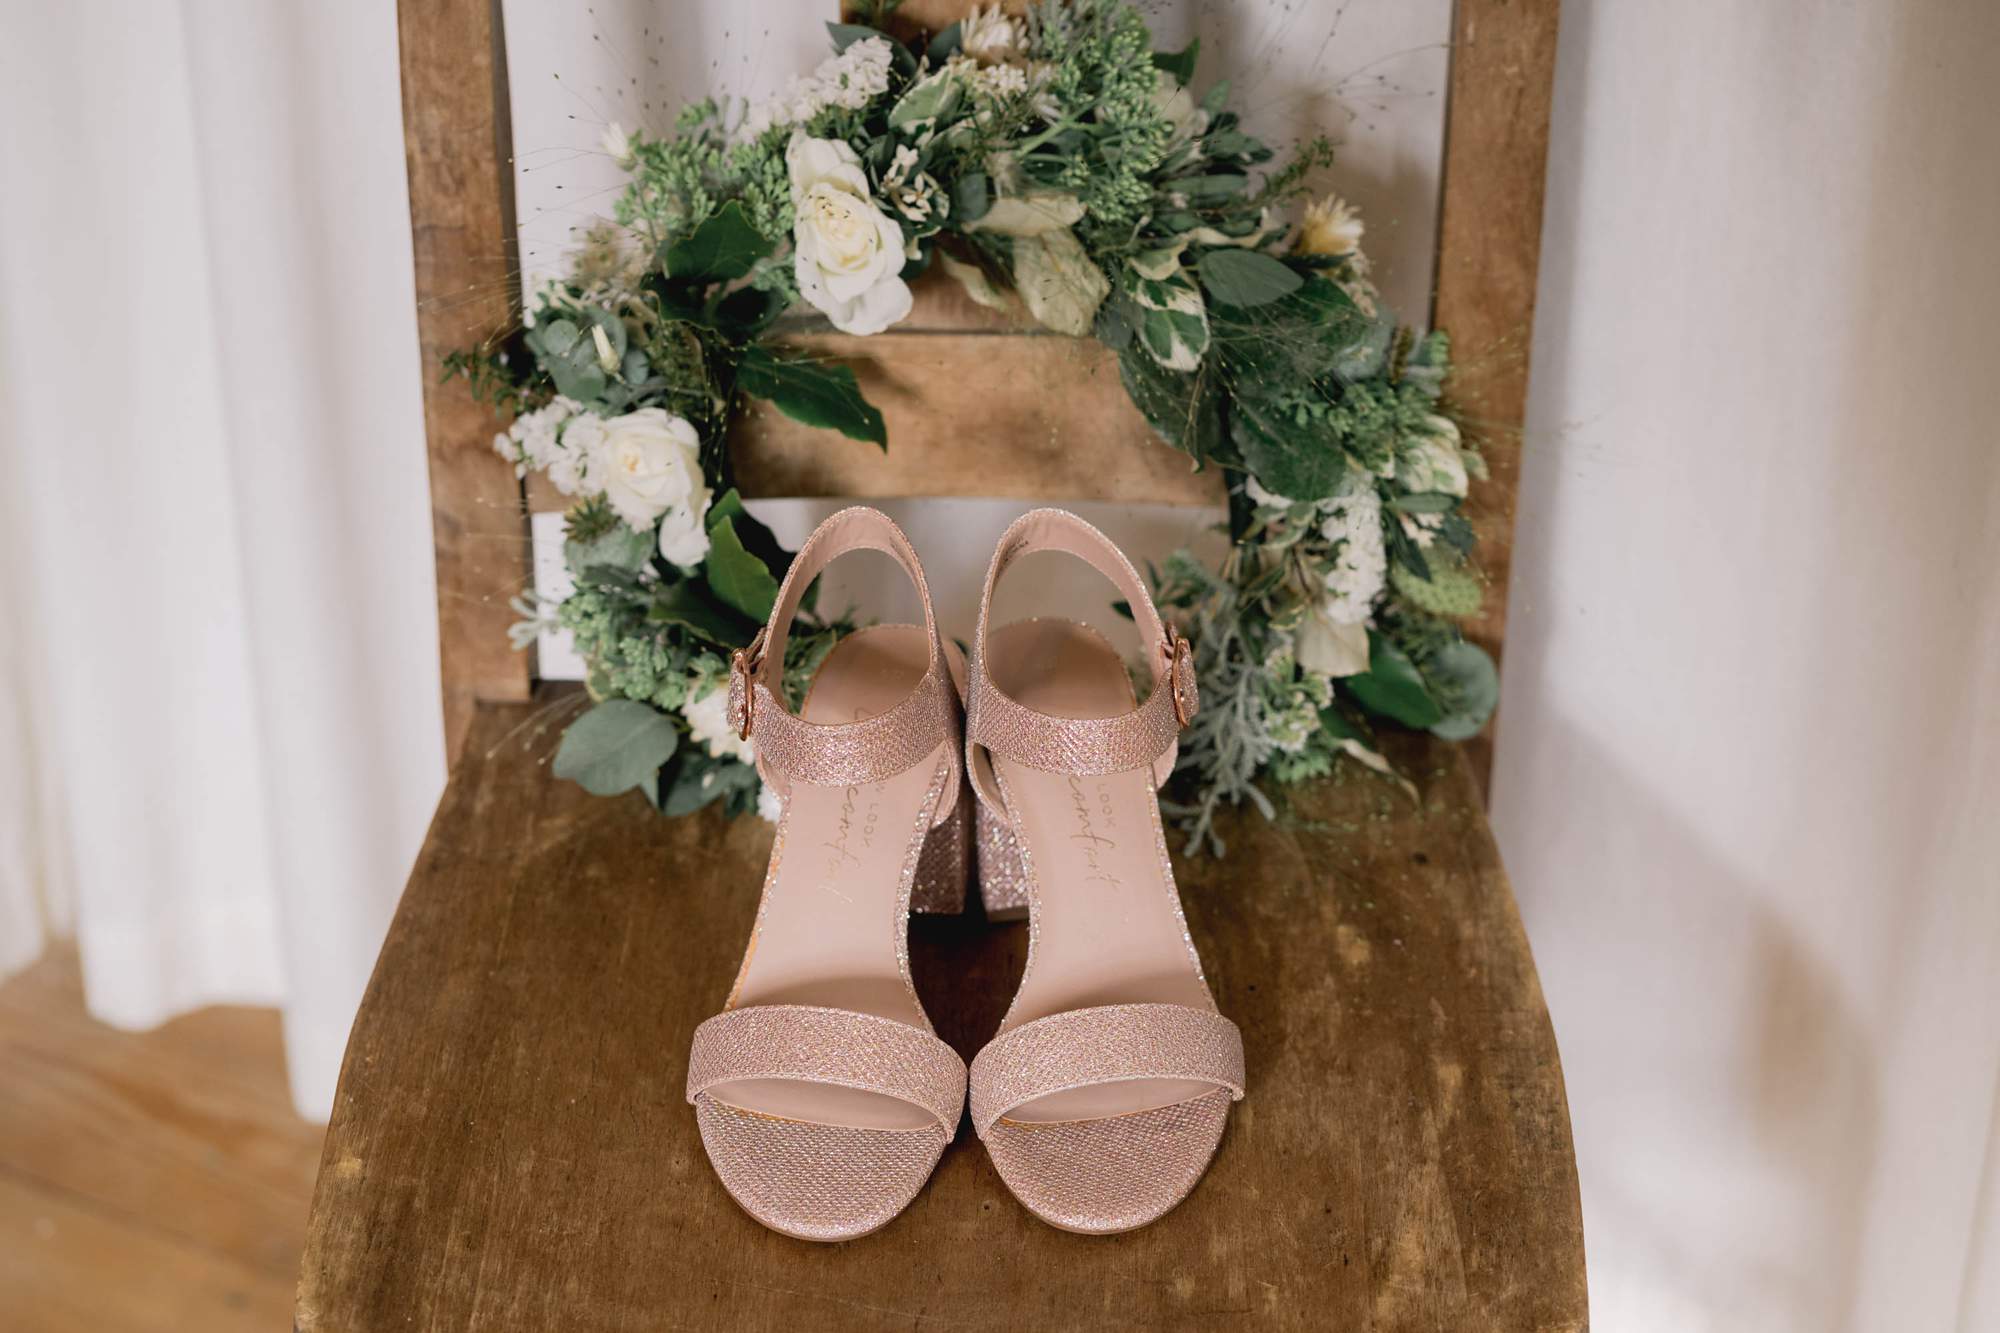 Bride's shoes that she will wear at her wedding ceremony at Eastbourne Town Hall.